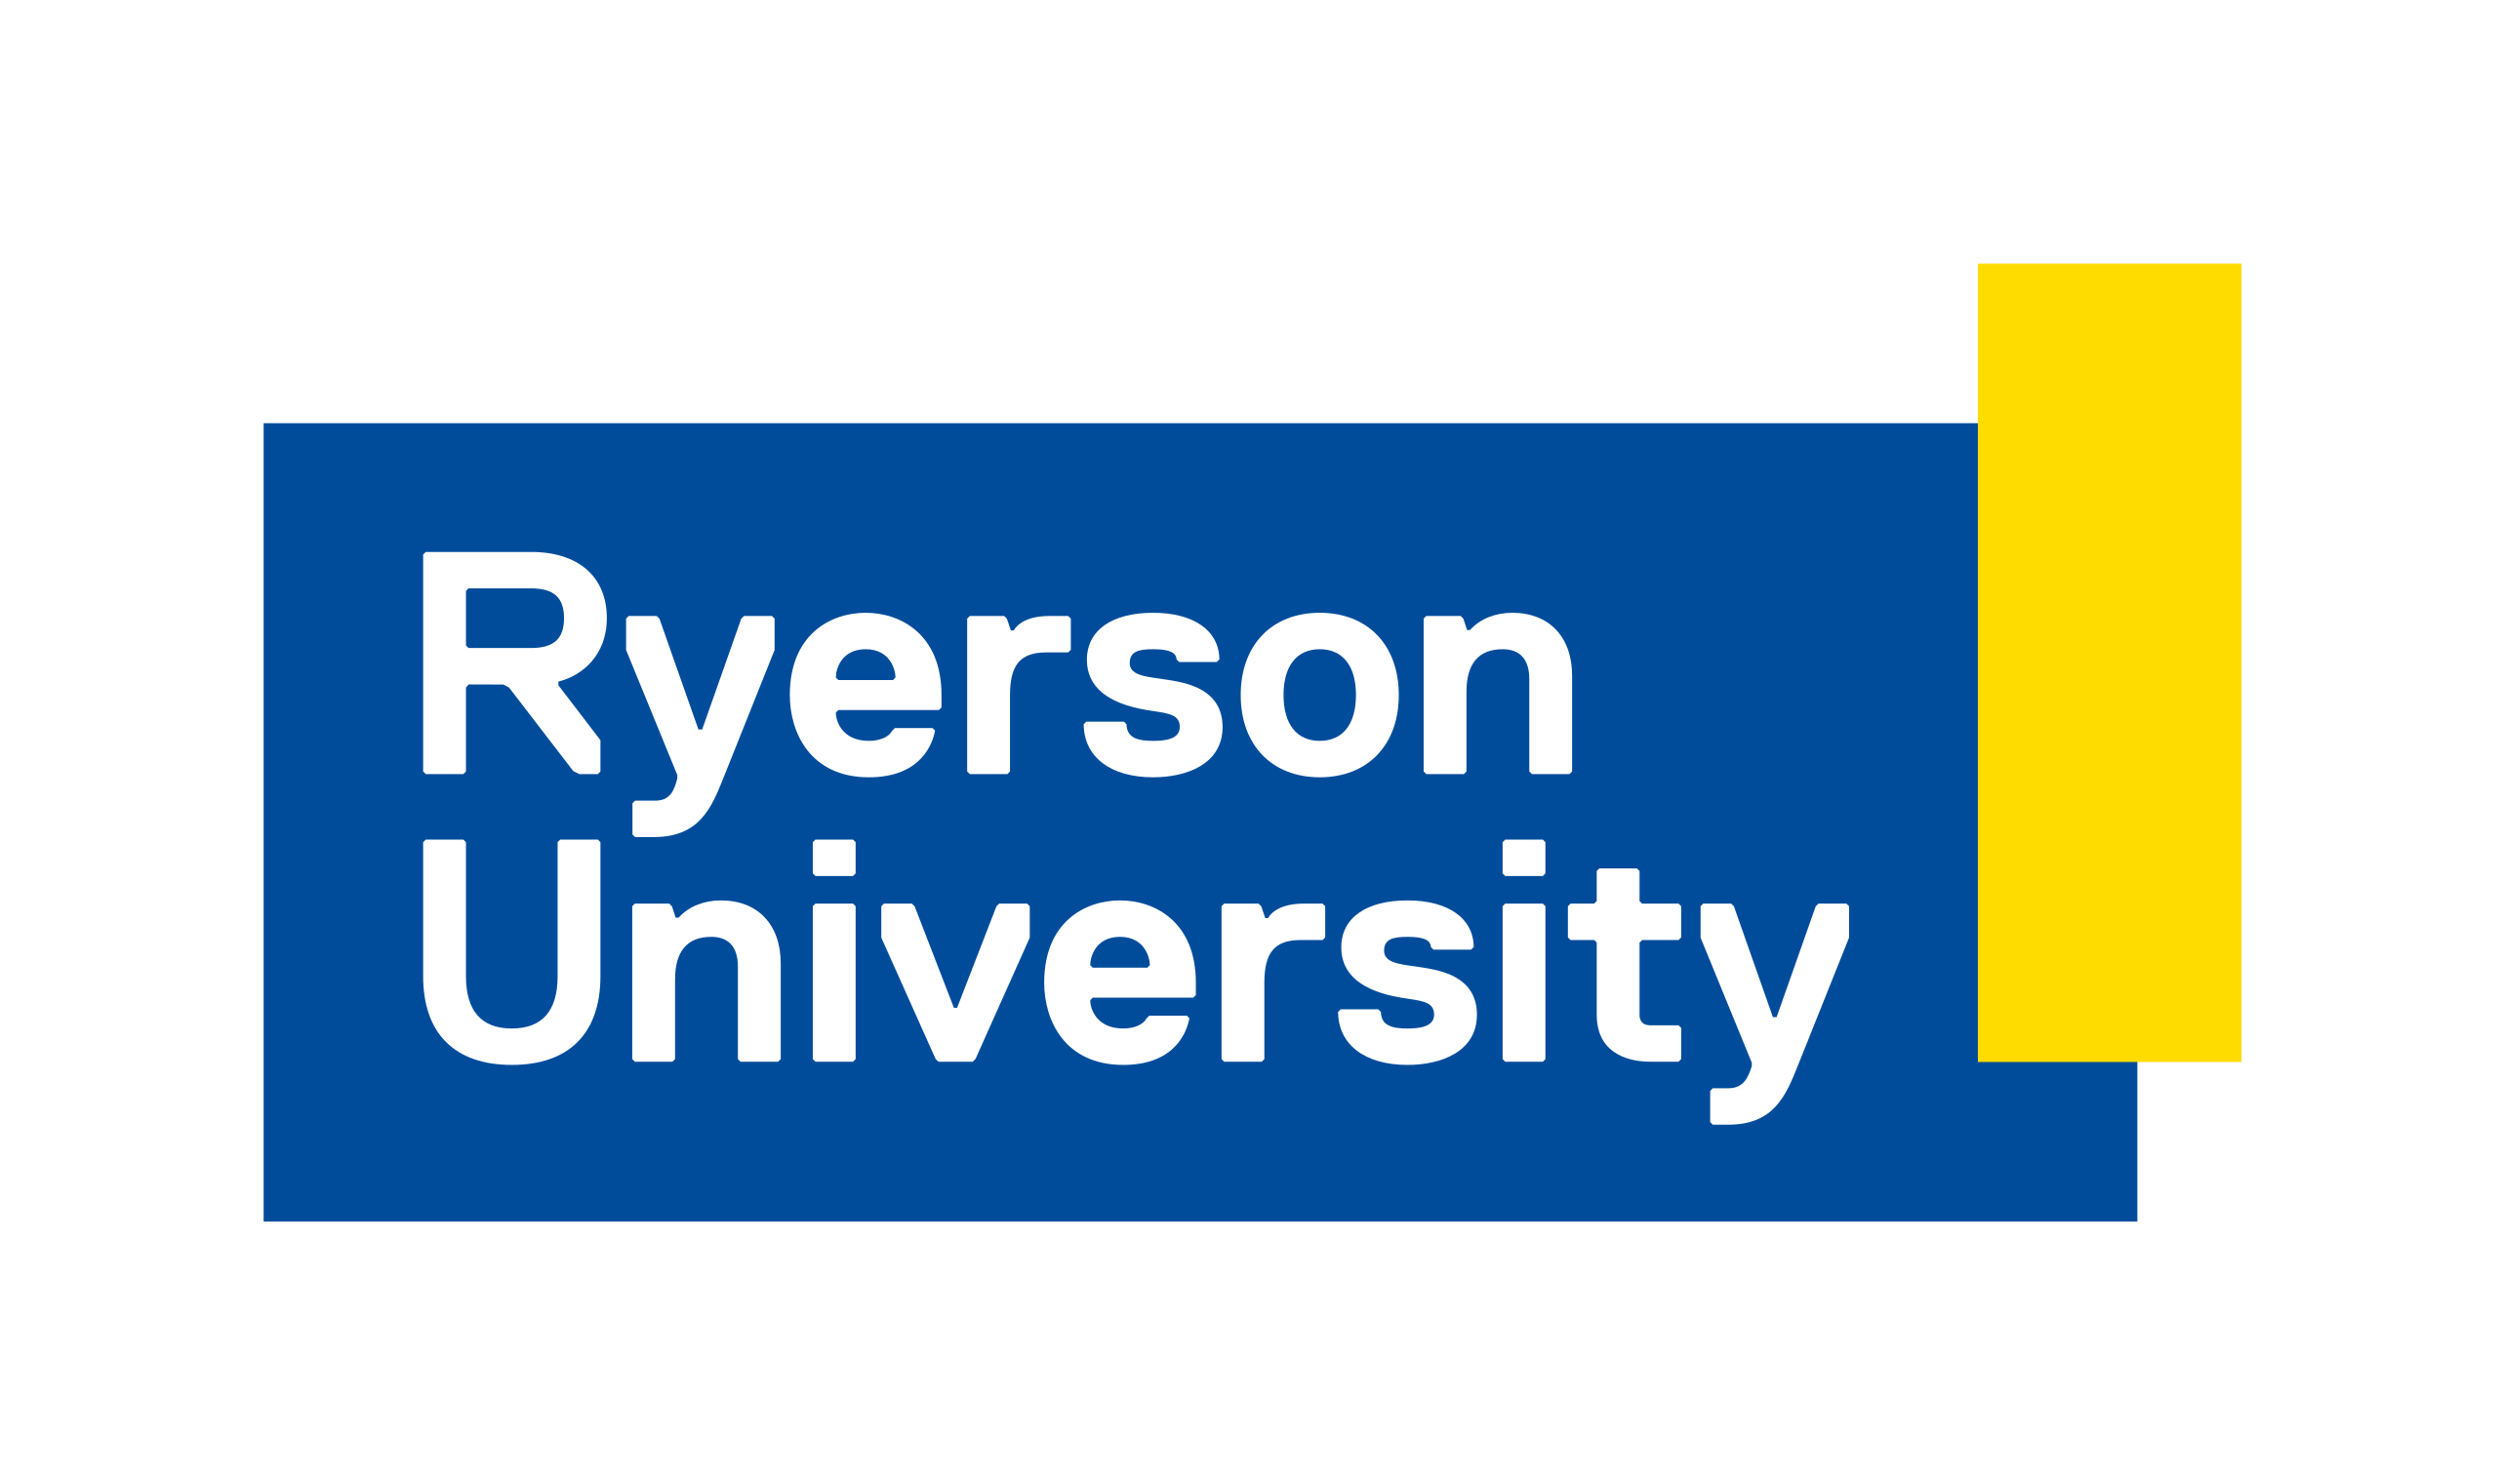 Nutrition and Food | Bachelor's degree | Health & Well-Being | On Campus | 4 years | Ryerson University | Canada